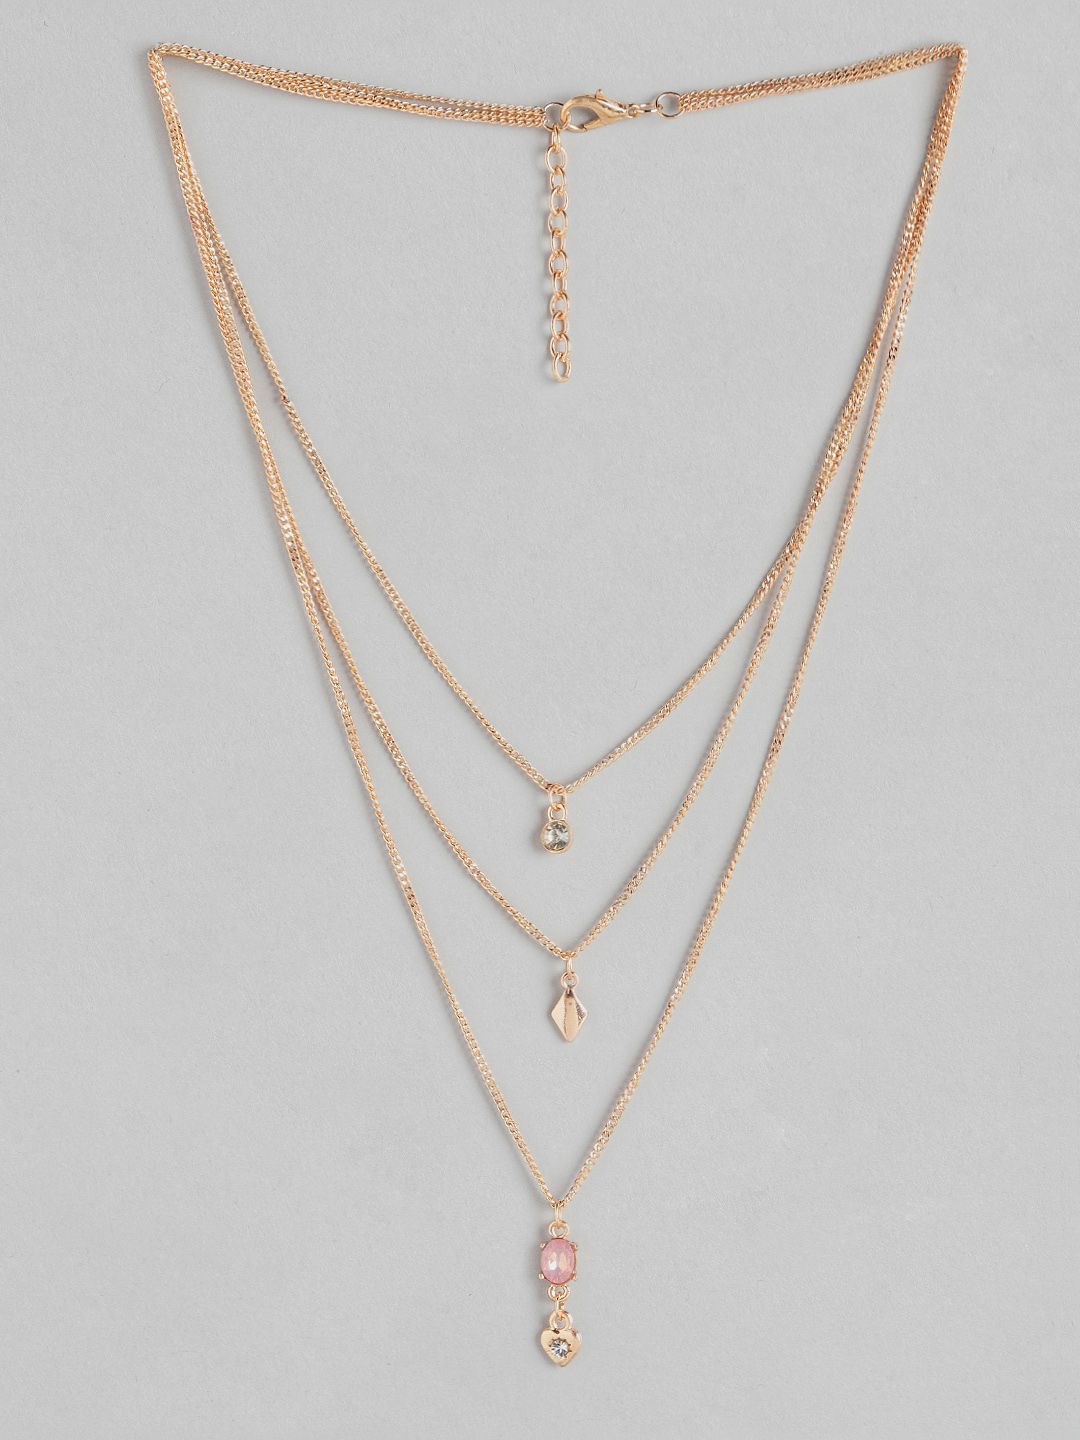 DressBerry Rose Gold-Toned Stone Studded Layered Necklace Price in India